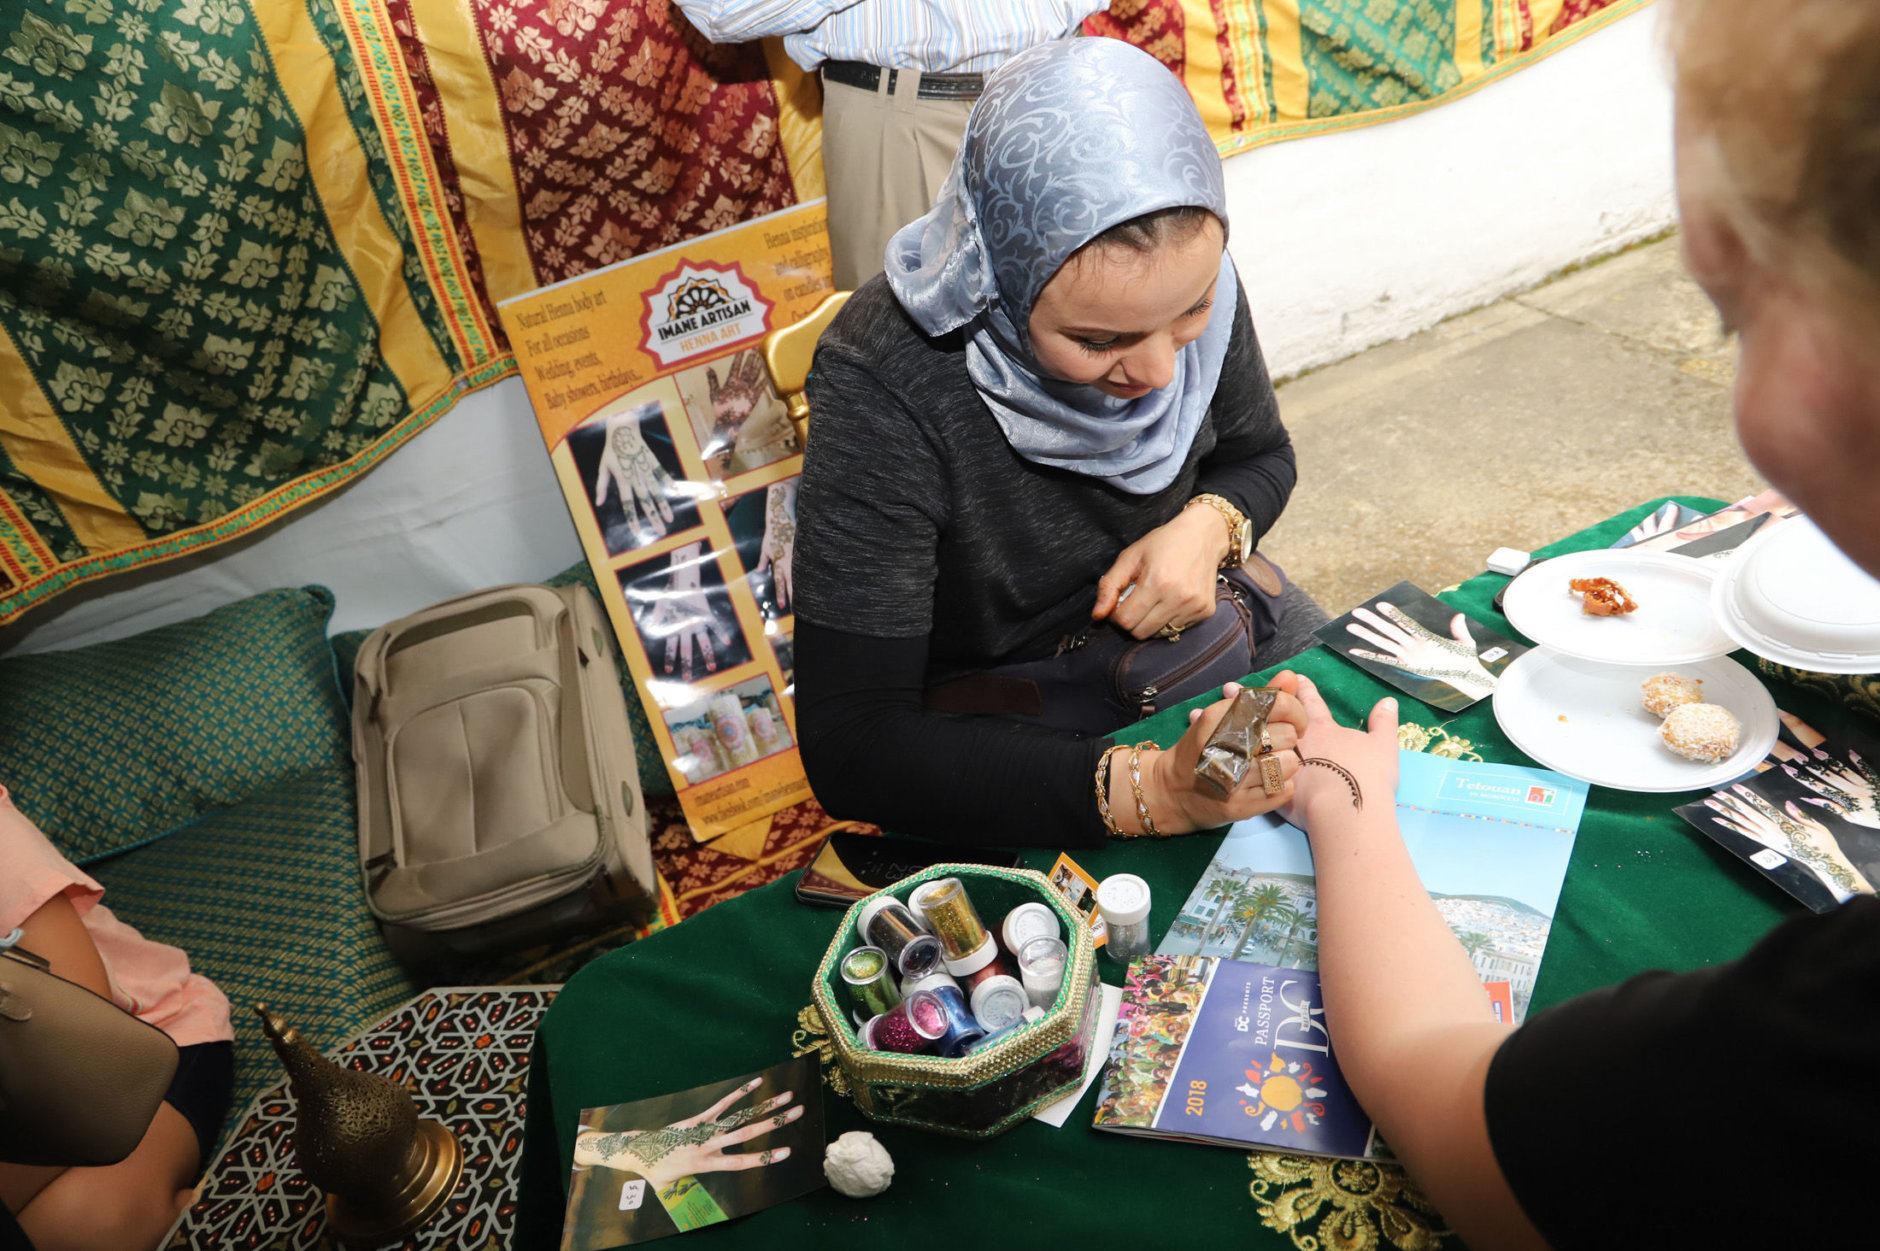 Henna painting at the Moroccan Embassy during the Around the World Embassy Tour. (Courtesy Cultural Tourism DC)